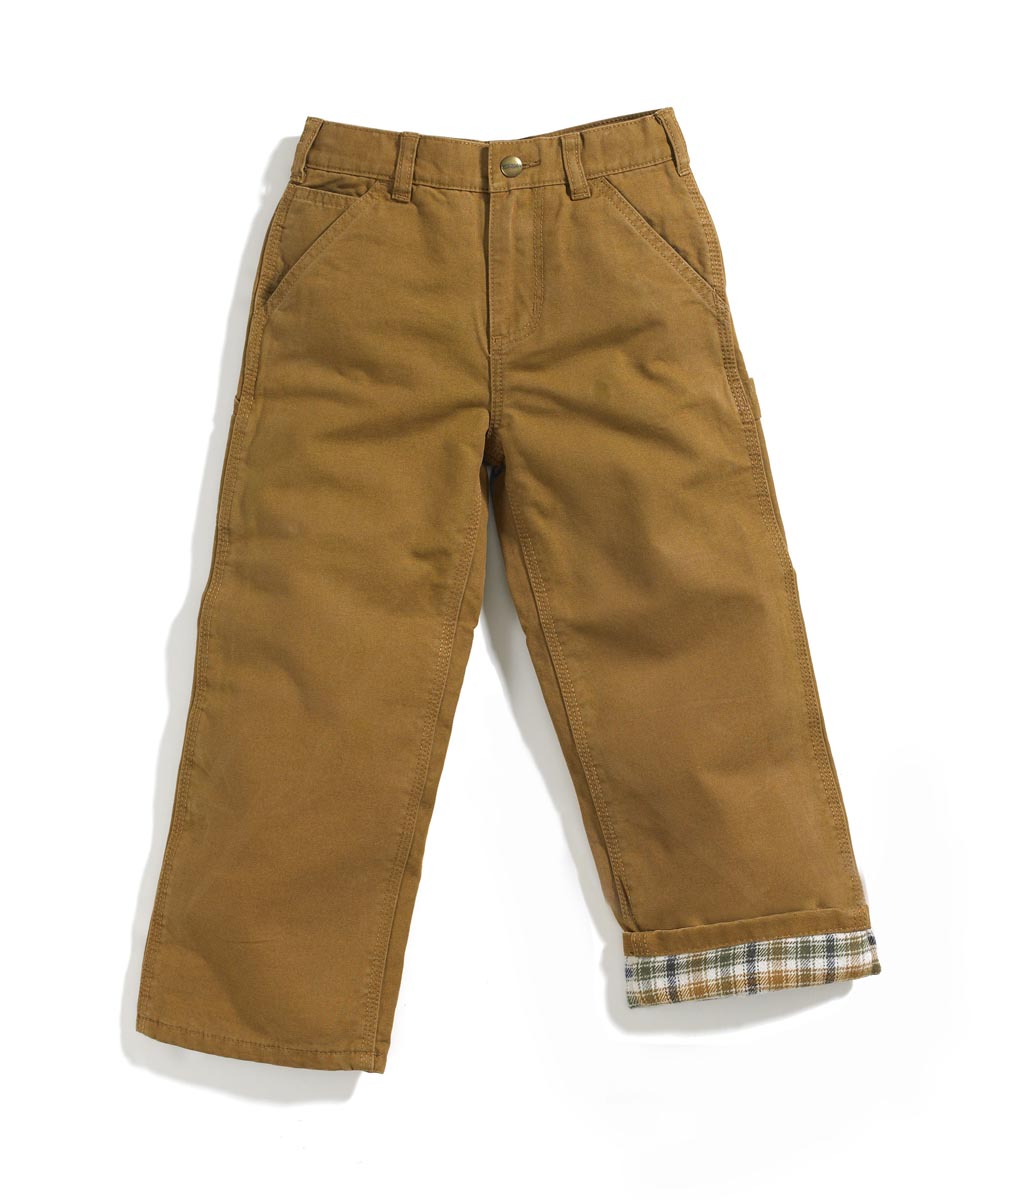 Carhartt Boys' Flannel Lined Dungaree Pant